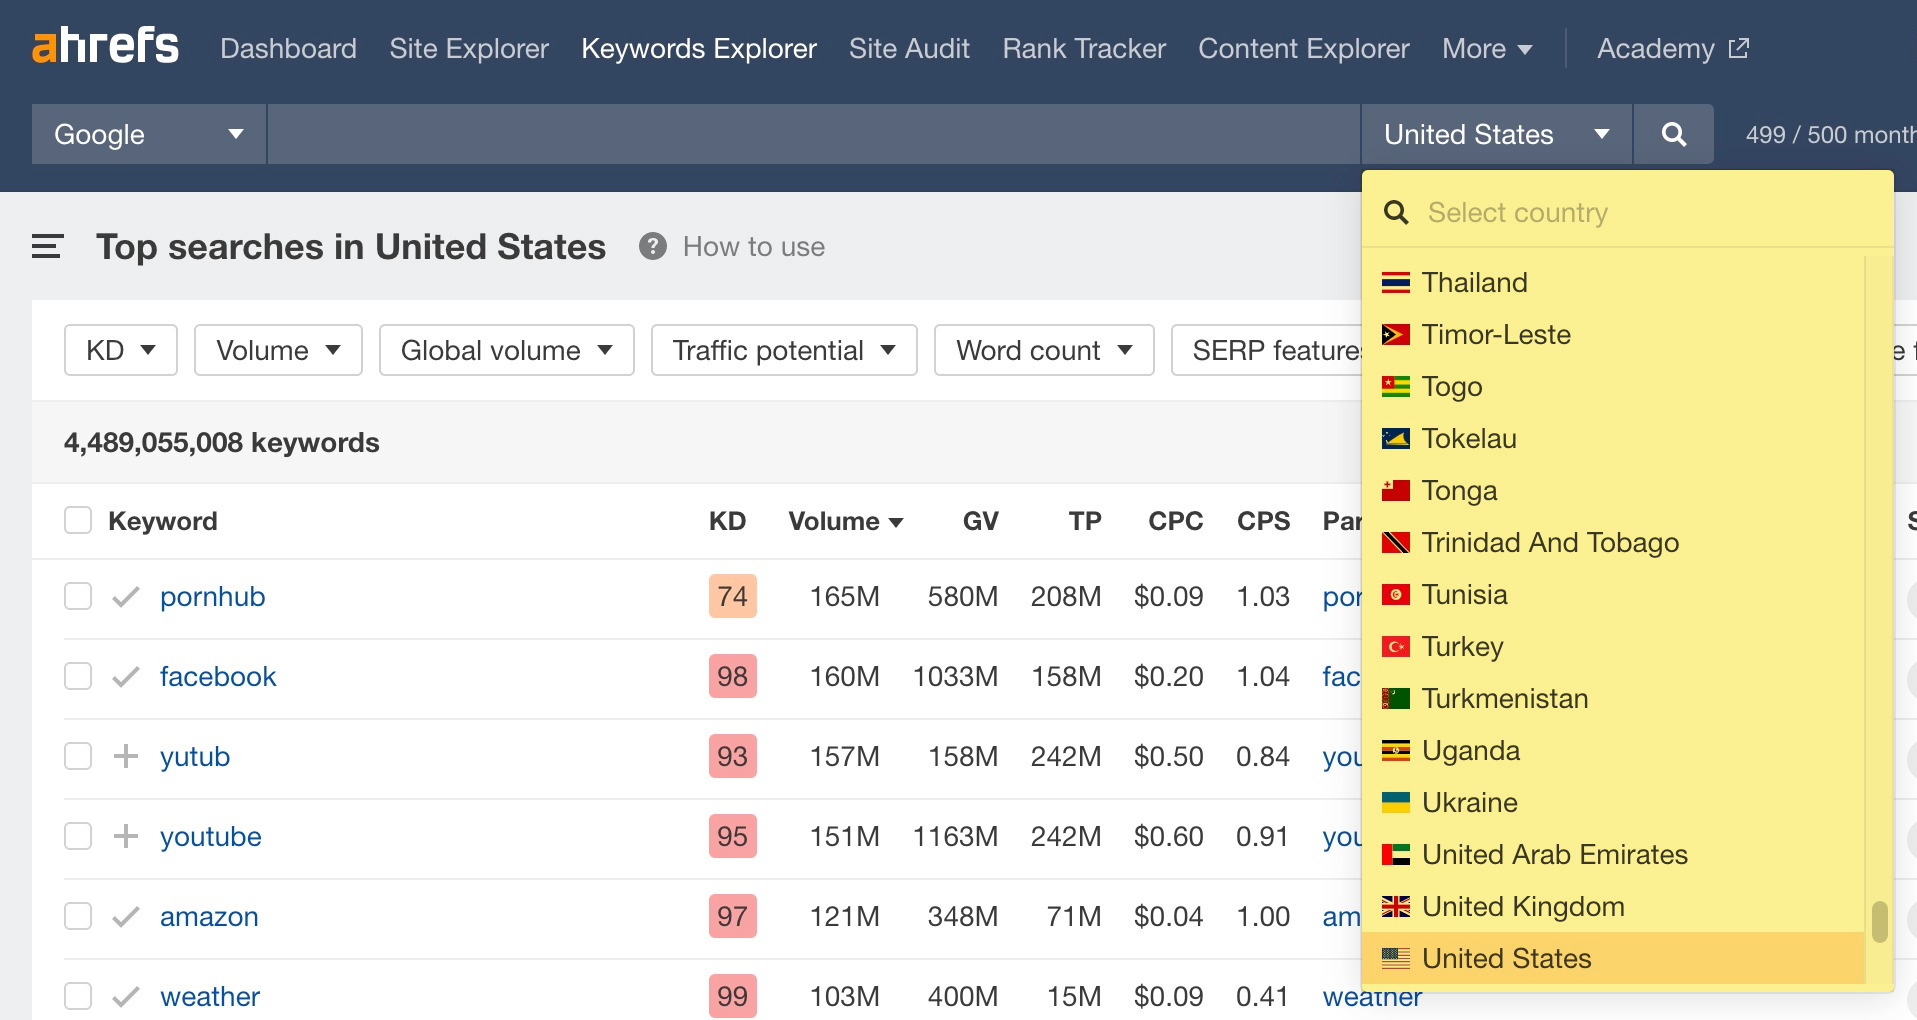 How to select a country in Keywords Explorer